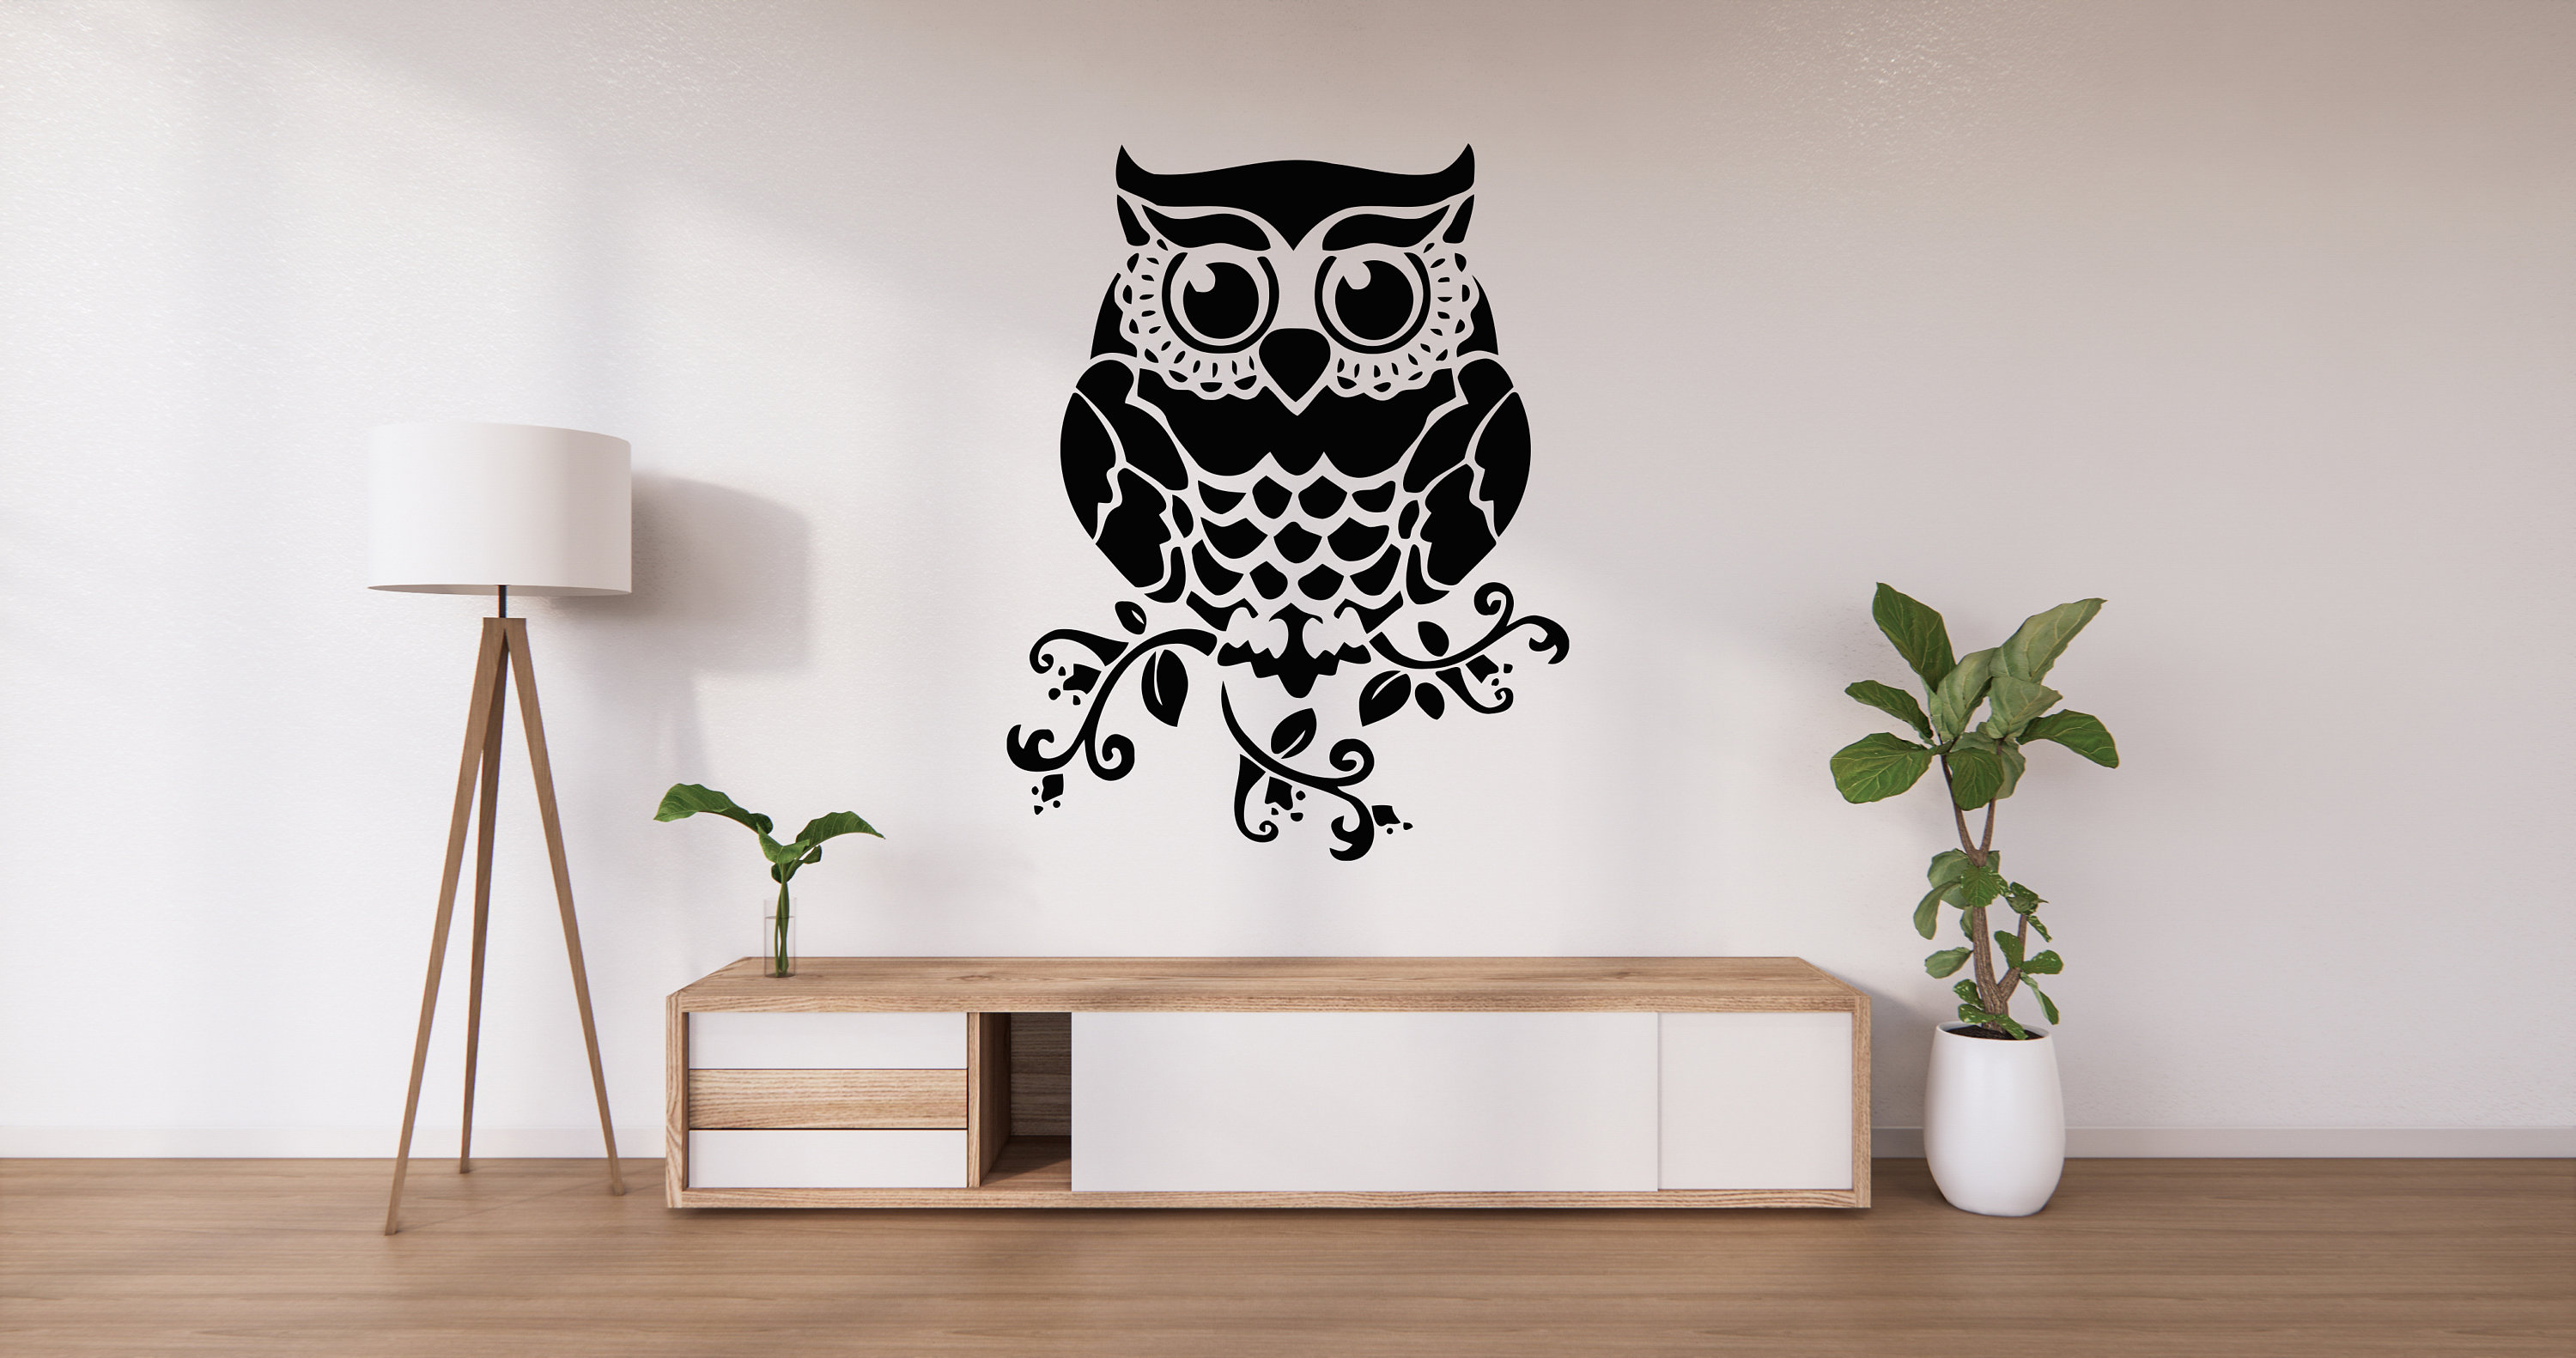 Dry Erase Owl Wall Decal - Dry Erase Wall Decal Murals - Primedecals